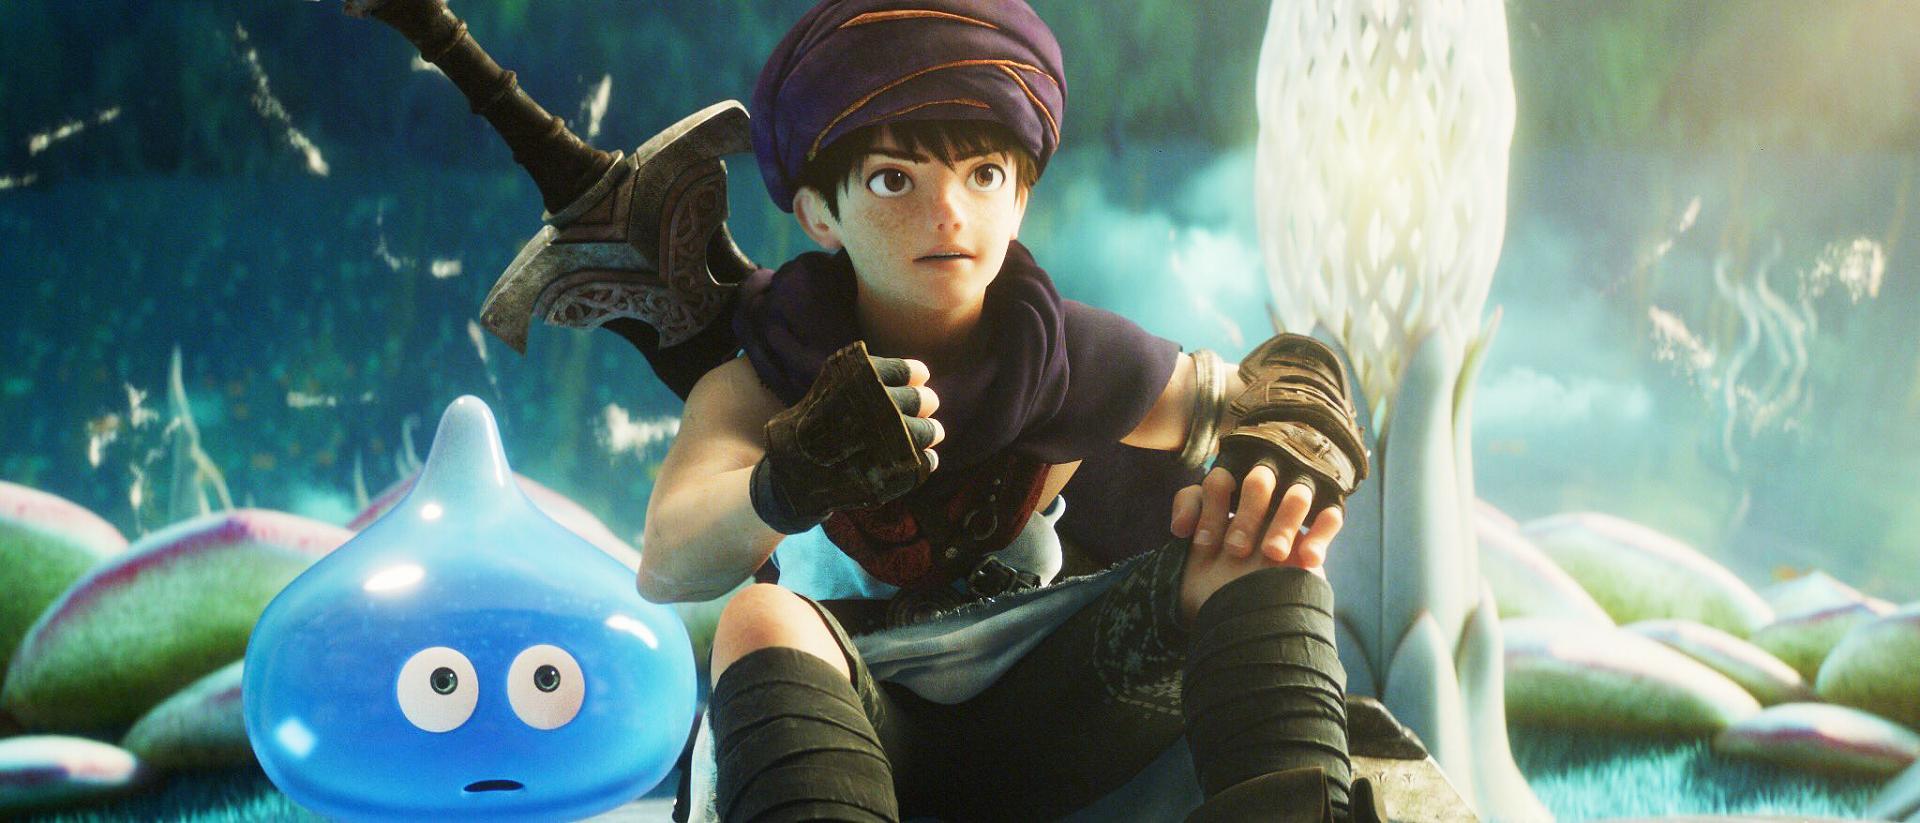 Watch Dragon Quest- Your Story (2019) Full Anime on Kissanimes.cc